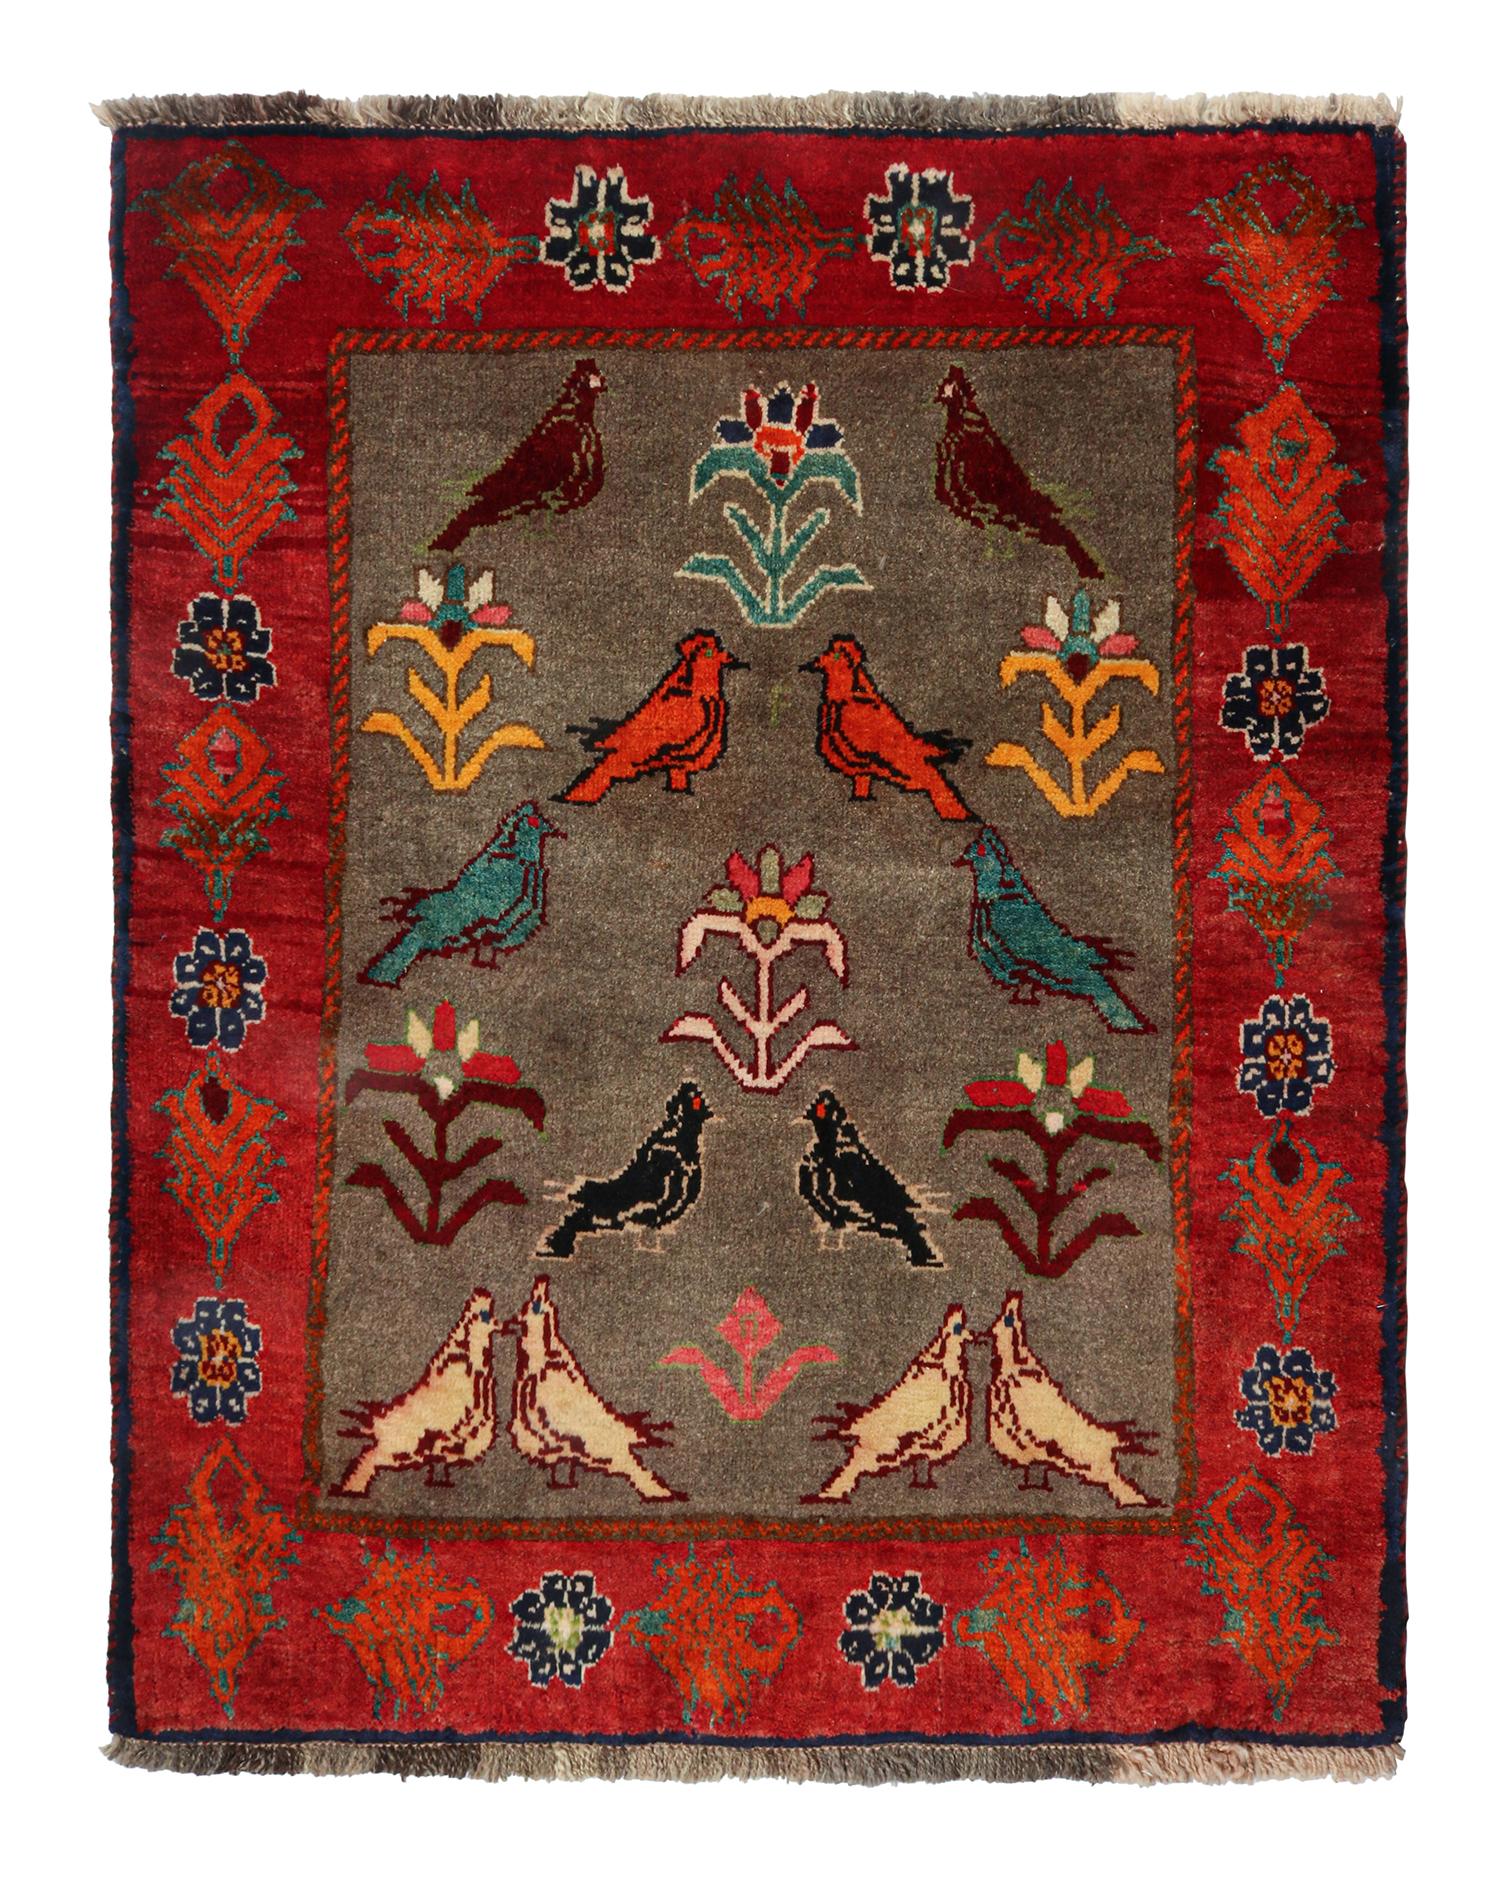 A 3x4 vintage Persian Gabbeh rug, marking a poised entry to Rug & Kilim’s curation of rare tribal pieces. Hand-knotted in wool circa 1950-1960 with an extremely collectible design and individualistic attitude.

On the Design: 

The mid-century